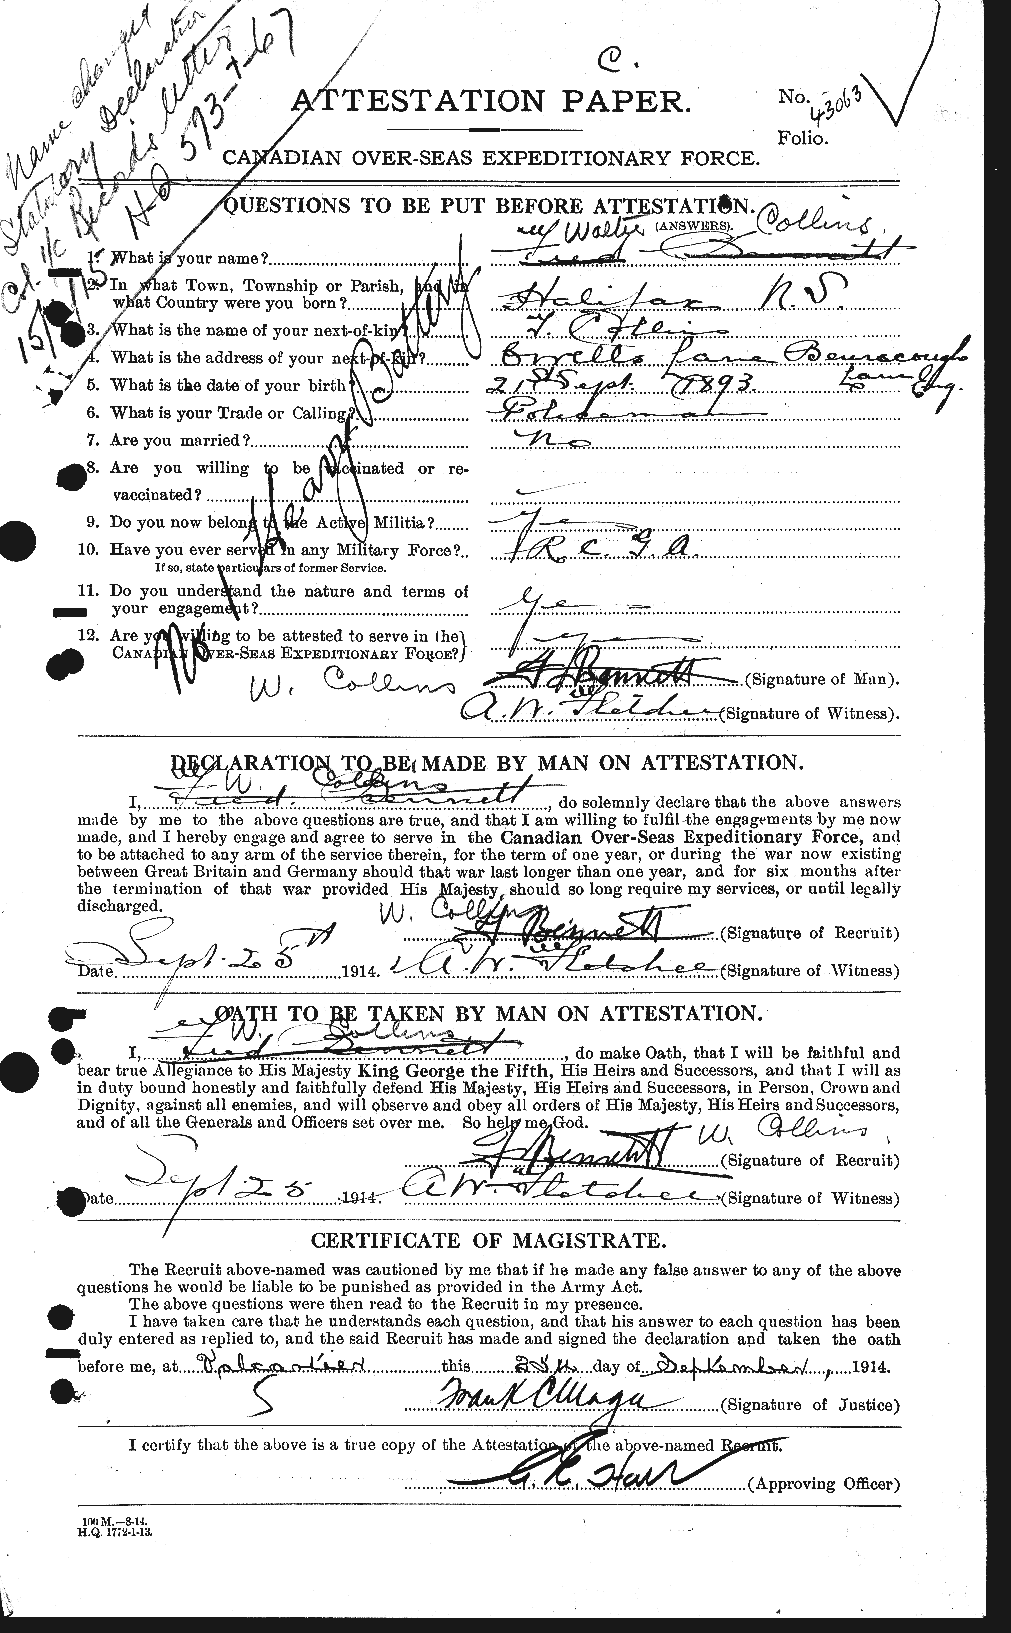 Personnel Records of the First World War - CEF 068834a